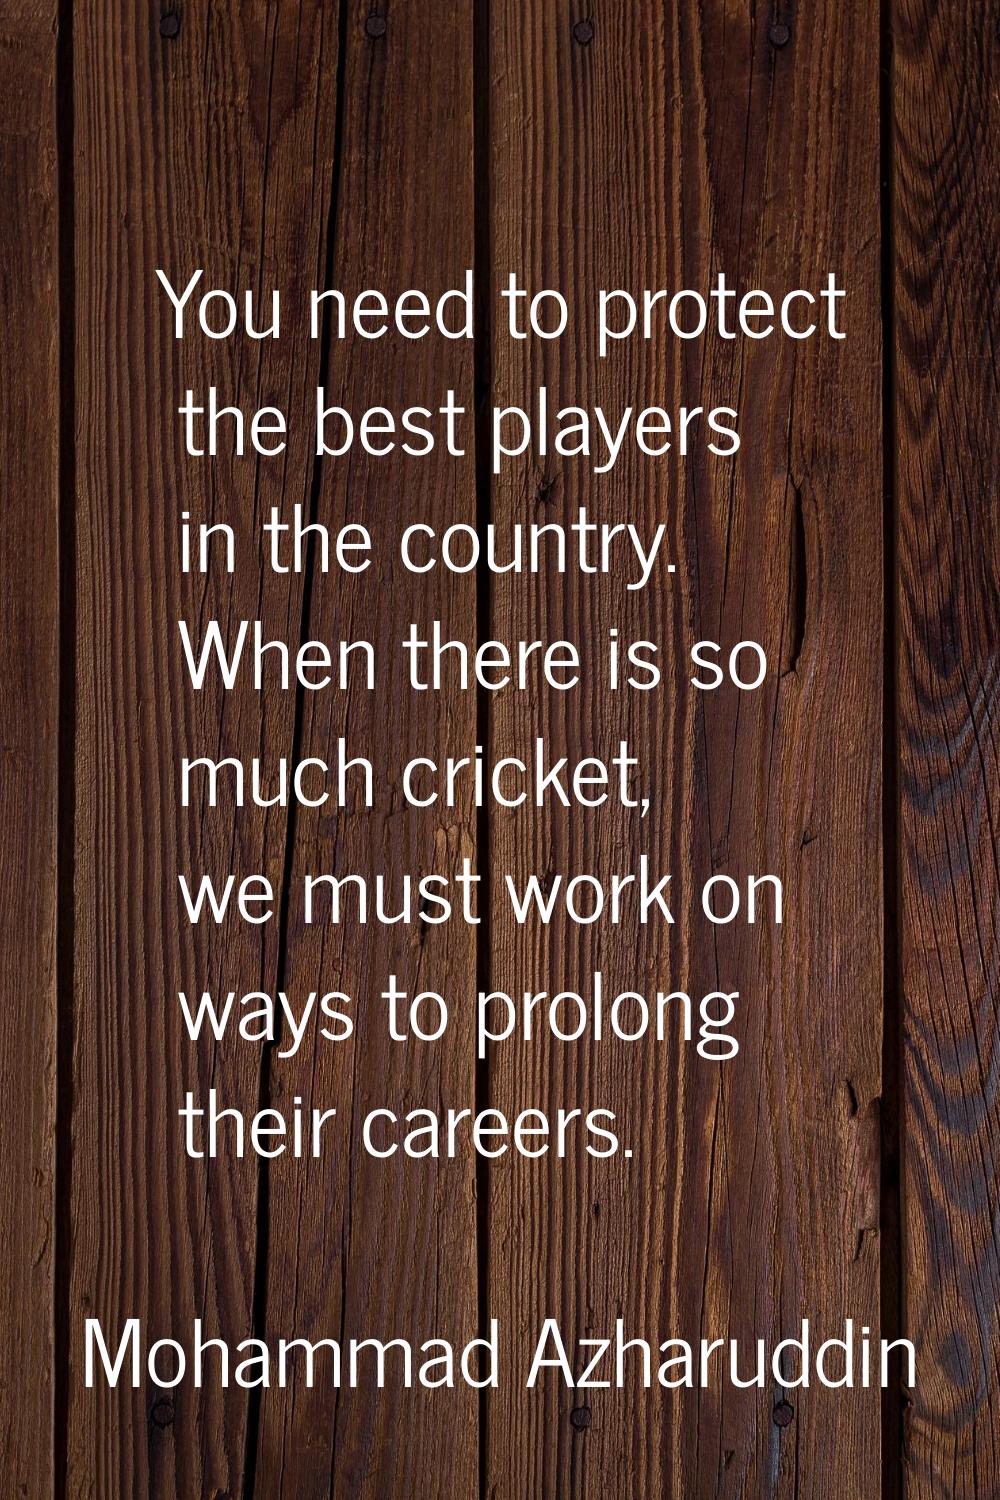 You need to protect the best players in the country. When there is so much cricket, we must work on